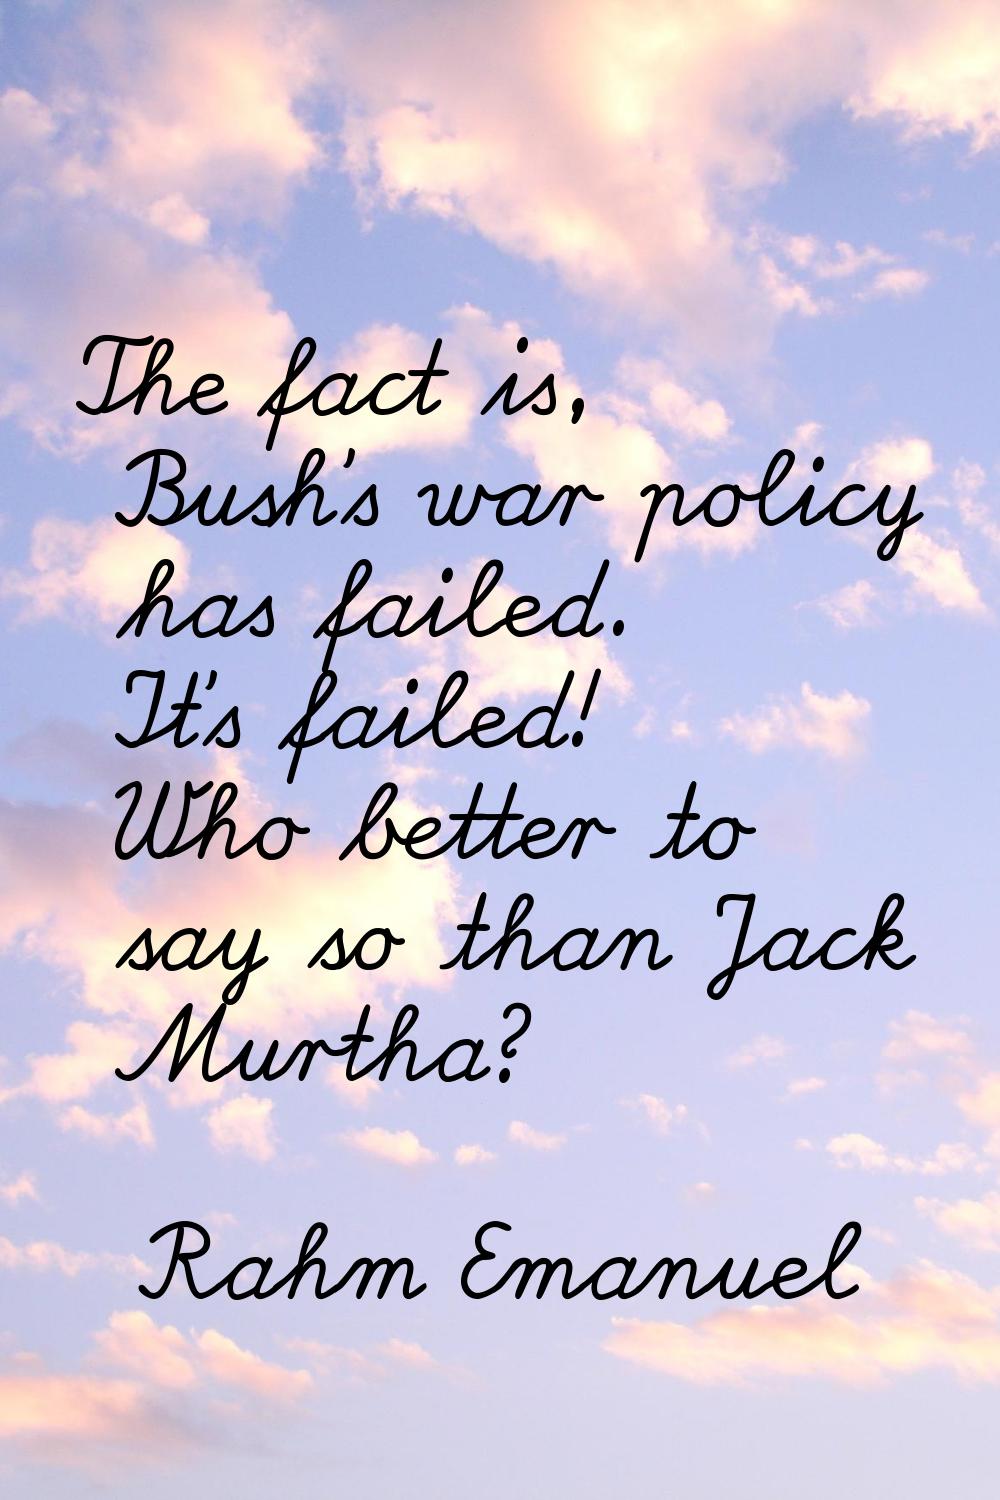 The fact is, Bush's war policy has failed. It's failed! Who better to say so than Jack Murtha?